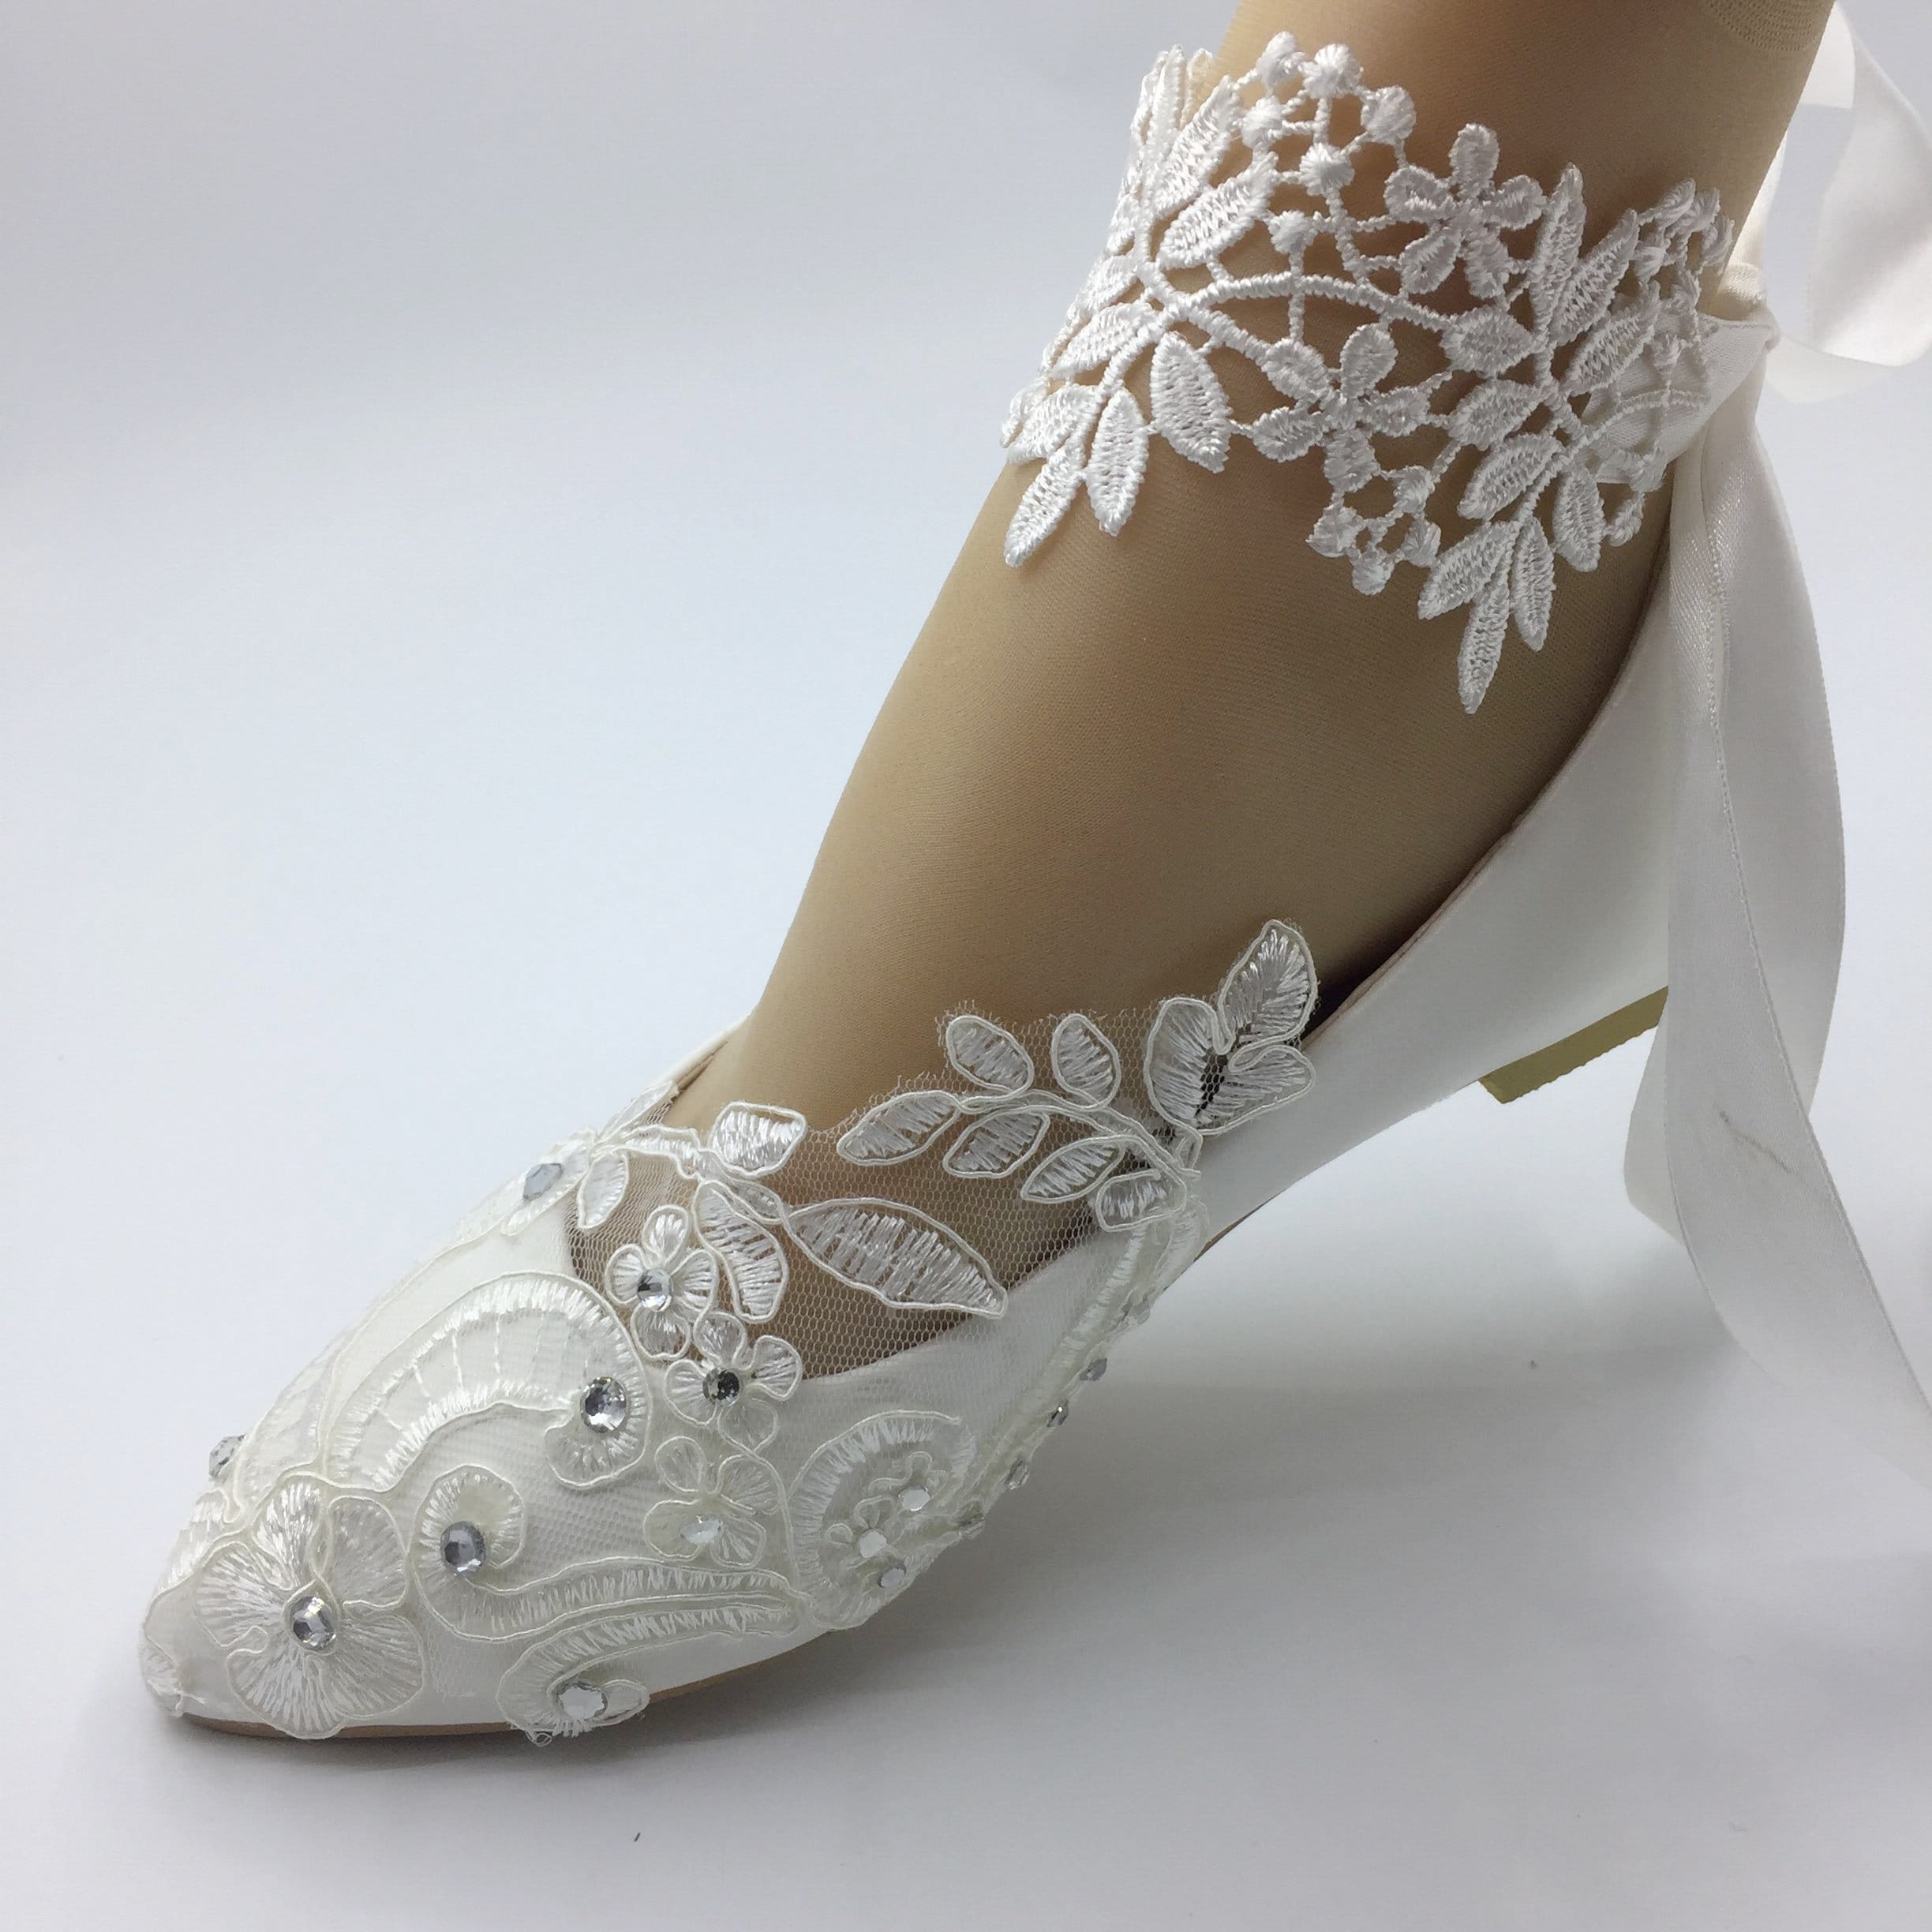 Lace Flower Lady Shoeswhite Lace Ankle Lace Trips Wedding | Etsy